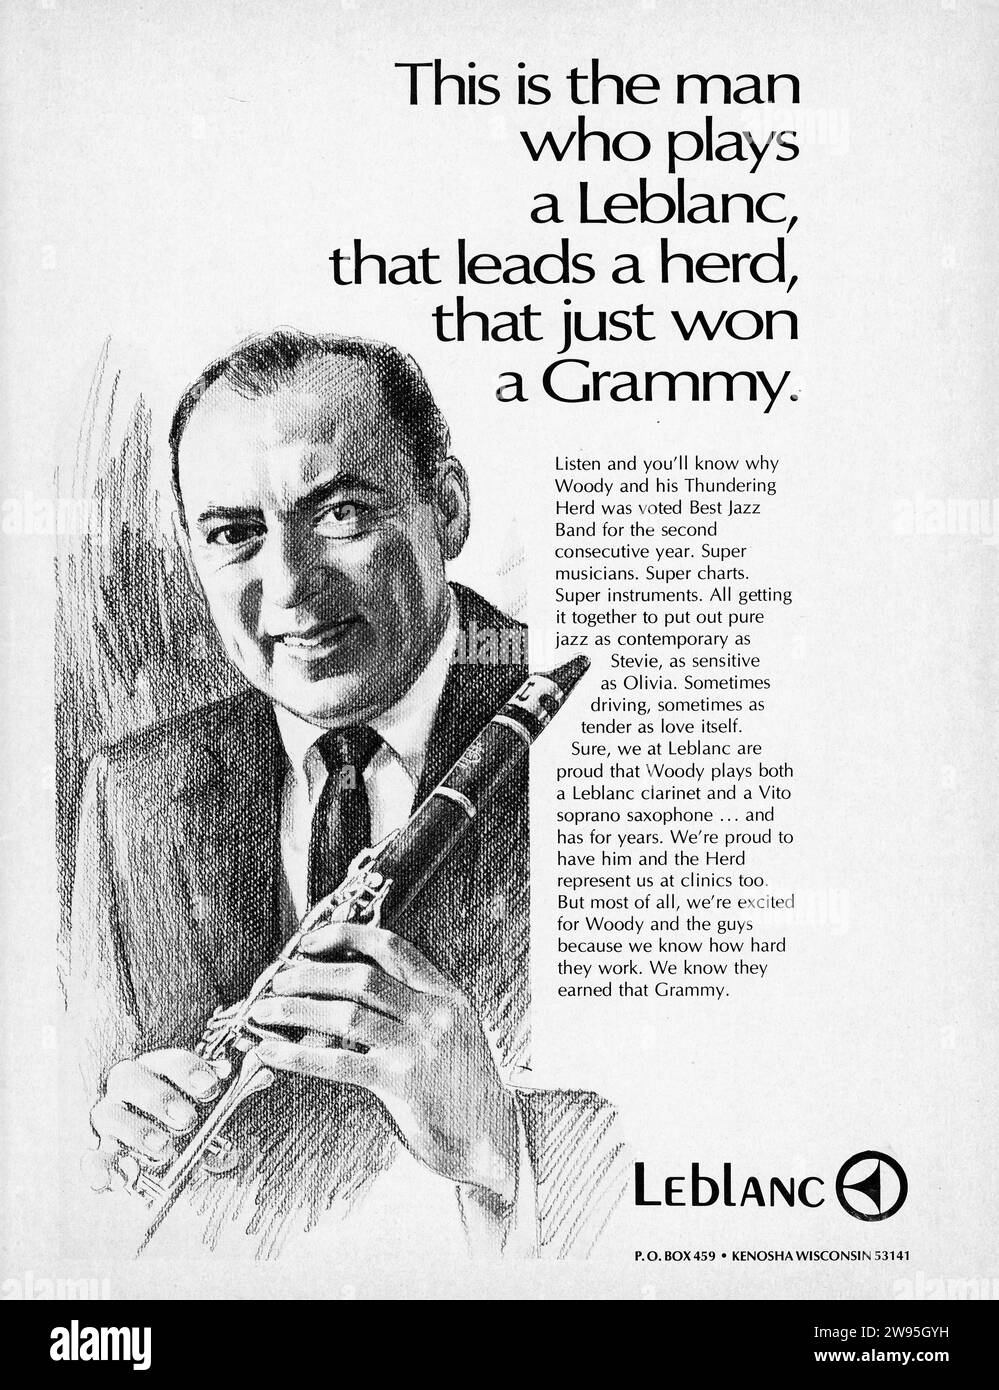 An ad from a mid 1970s music magazine with big band leader and star Woody Herman endorsing Leblanc clarinets. Stock Photo